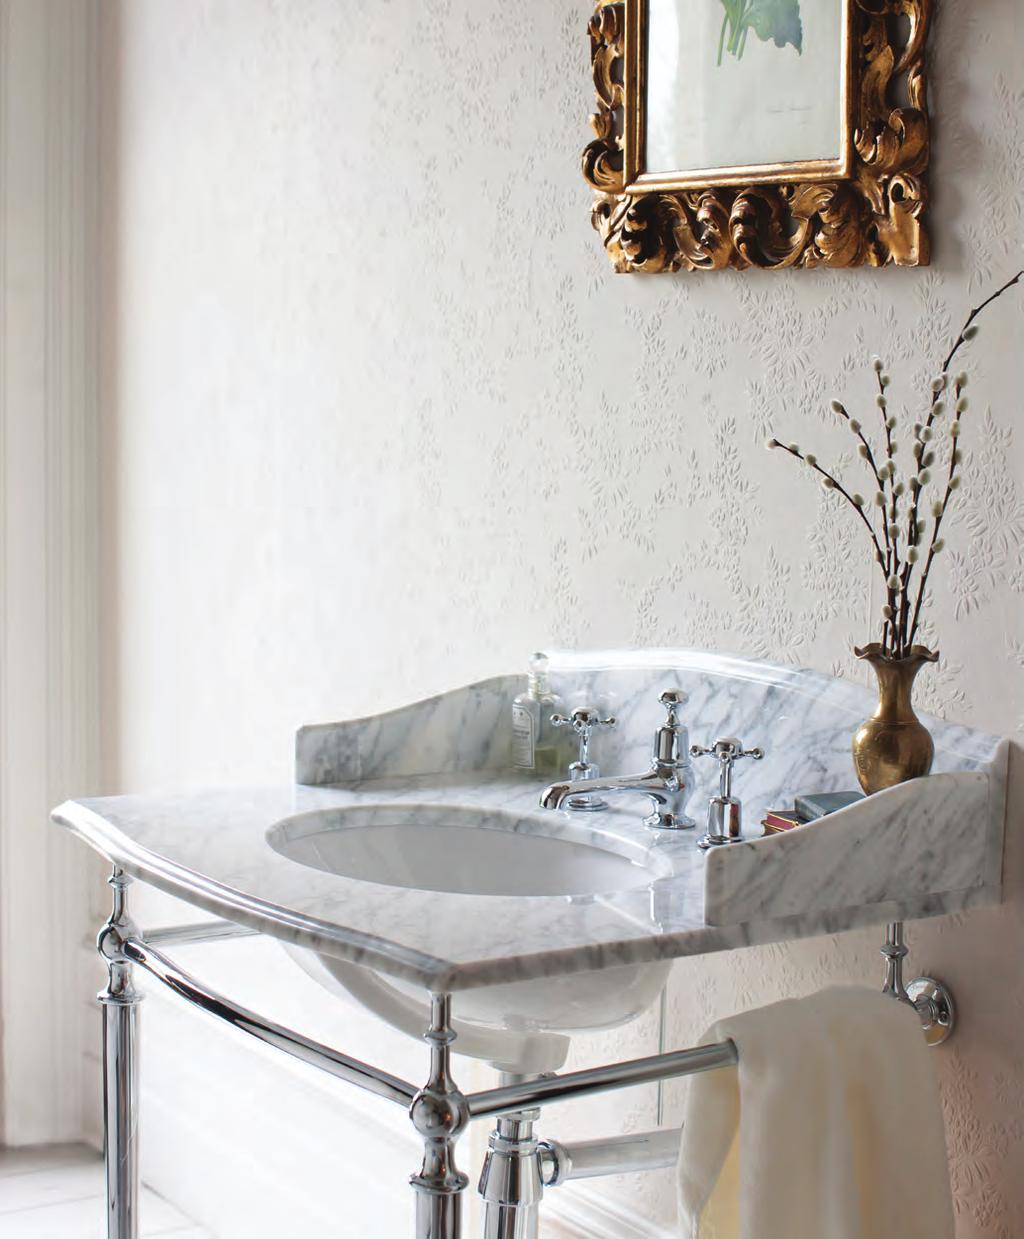 MARBLE BASINS MARBLE Provides an eye-catching and gorgeous focal point in your vintage setting.